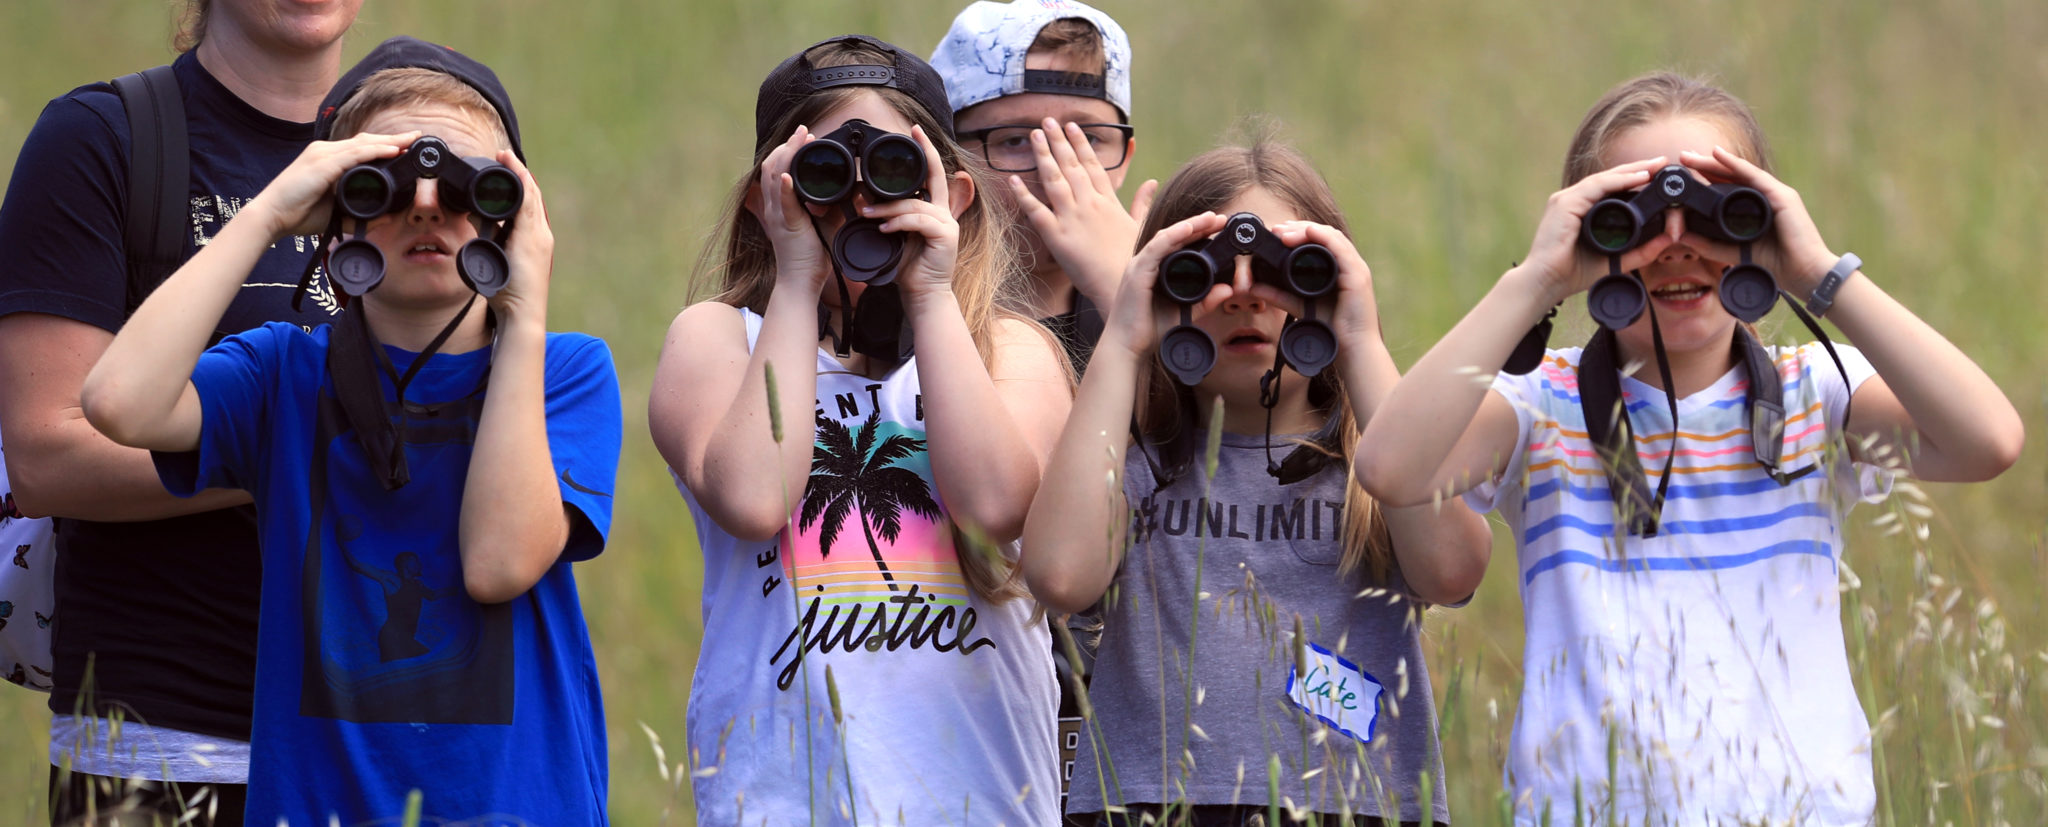 Students with Strawberry Elementary School in Santa Rosa use binoculars to view the open spaces of Pepperwood Preserve, Thursday, May 23, 2019. (Kent Porter / Press Democrat) 2019